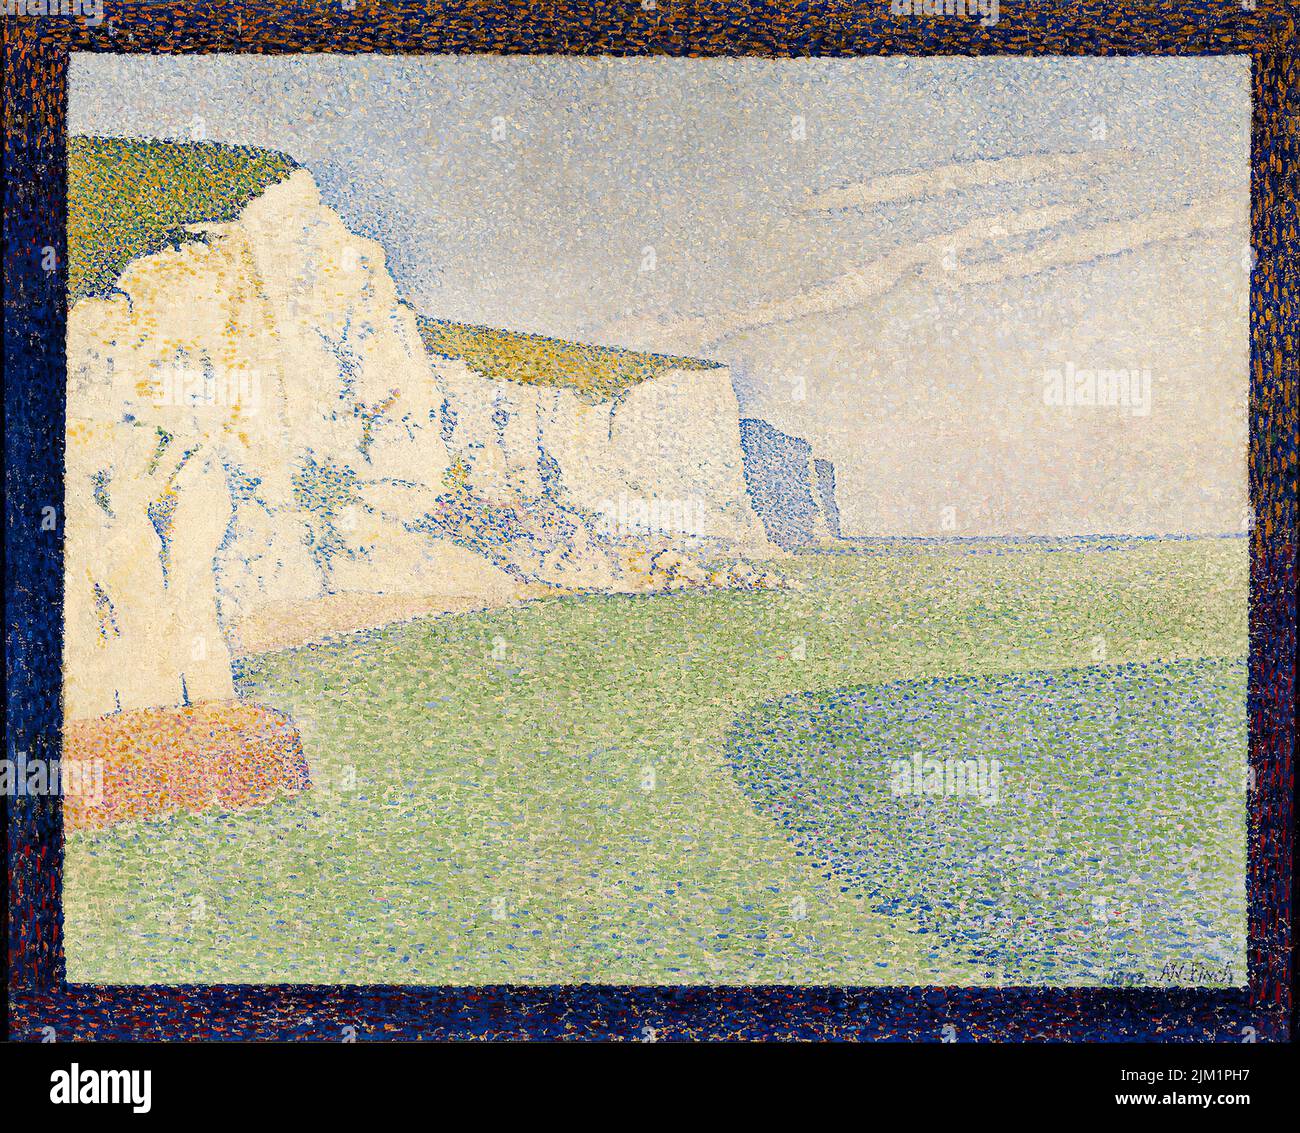 The Cliffs of Dover, The Cliffs at South Foreland, pointillism painting in oil on canvas by Alfred William Finch, 1892 Stock Photo